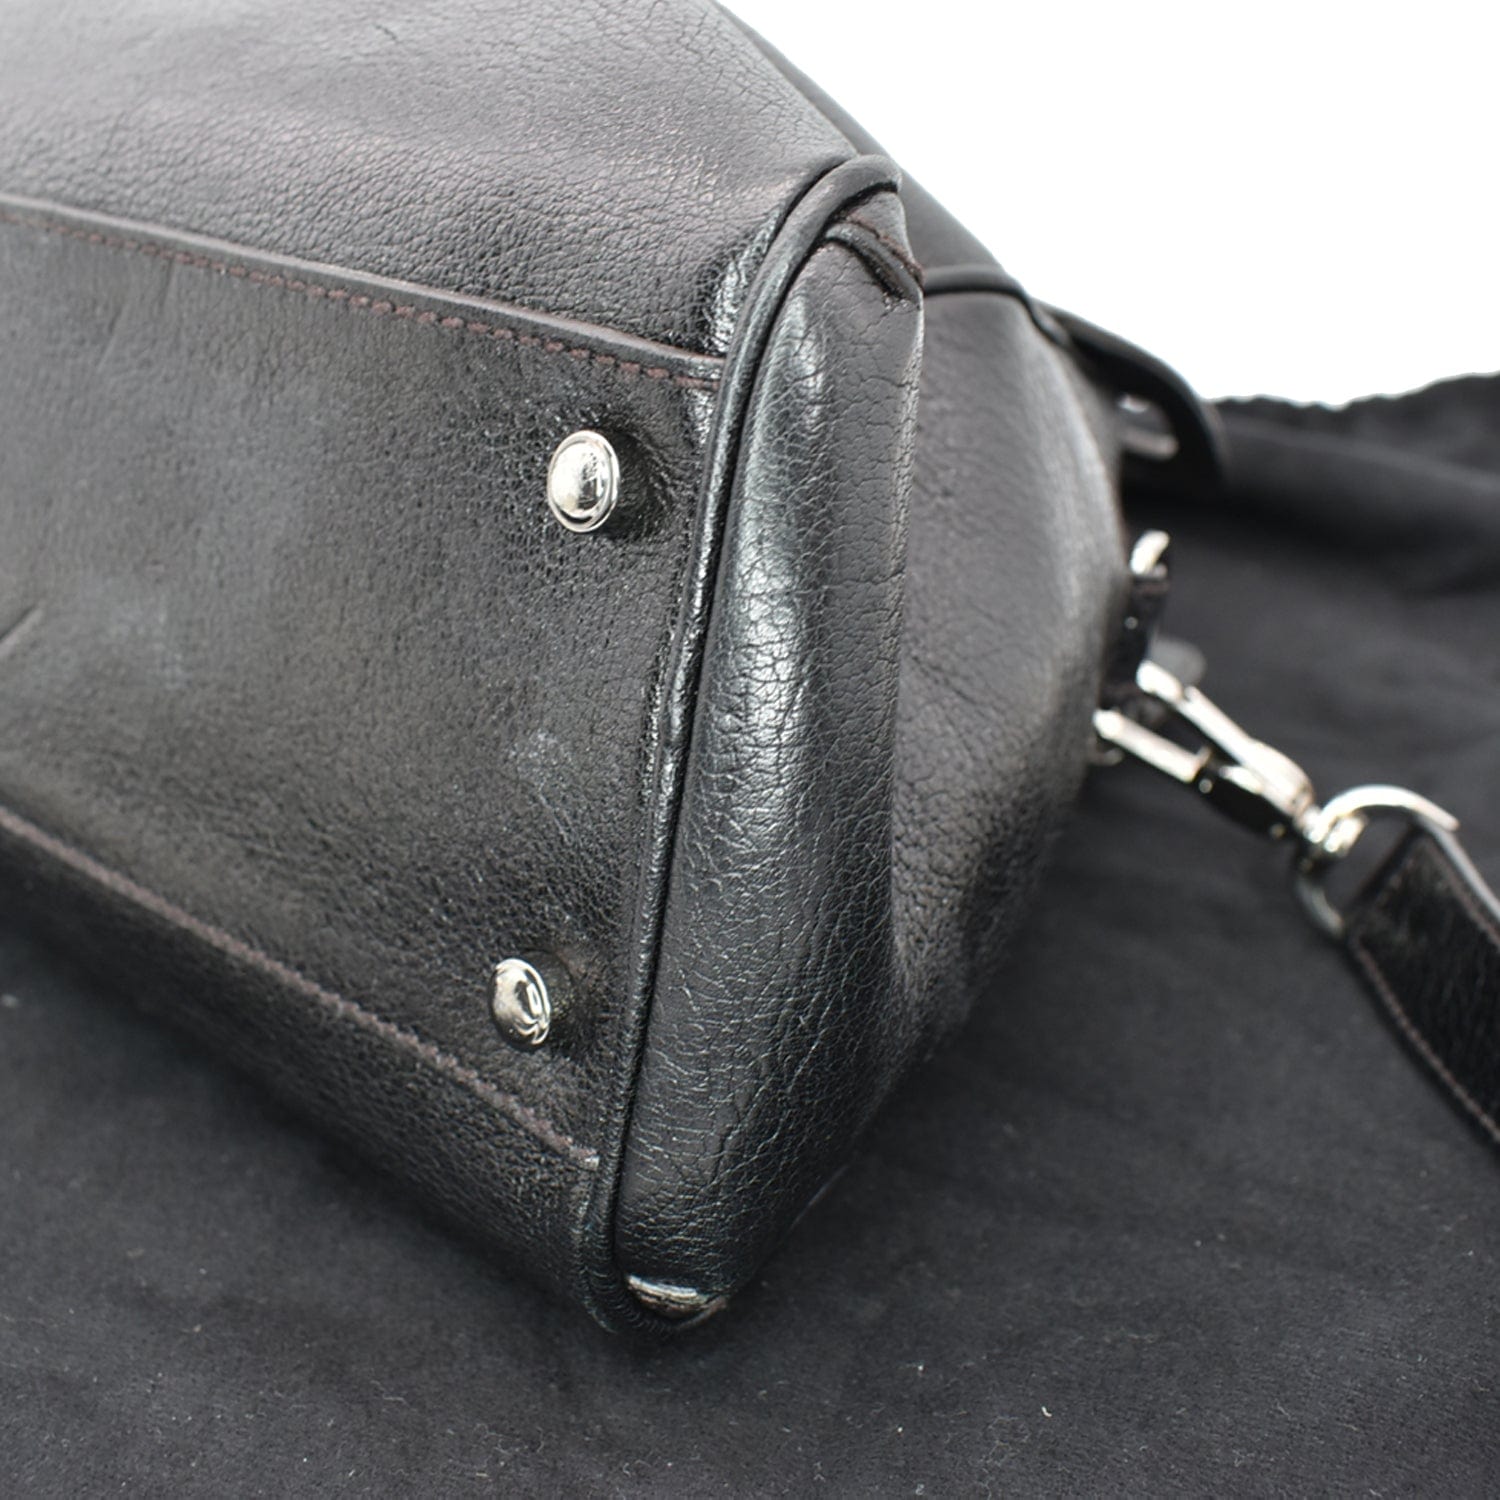 Restore an Old Leather Backpack  Handbag: Complete Guide - Marcello